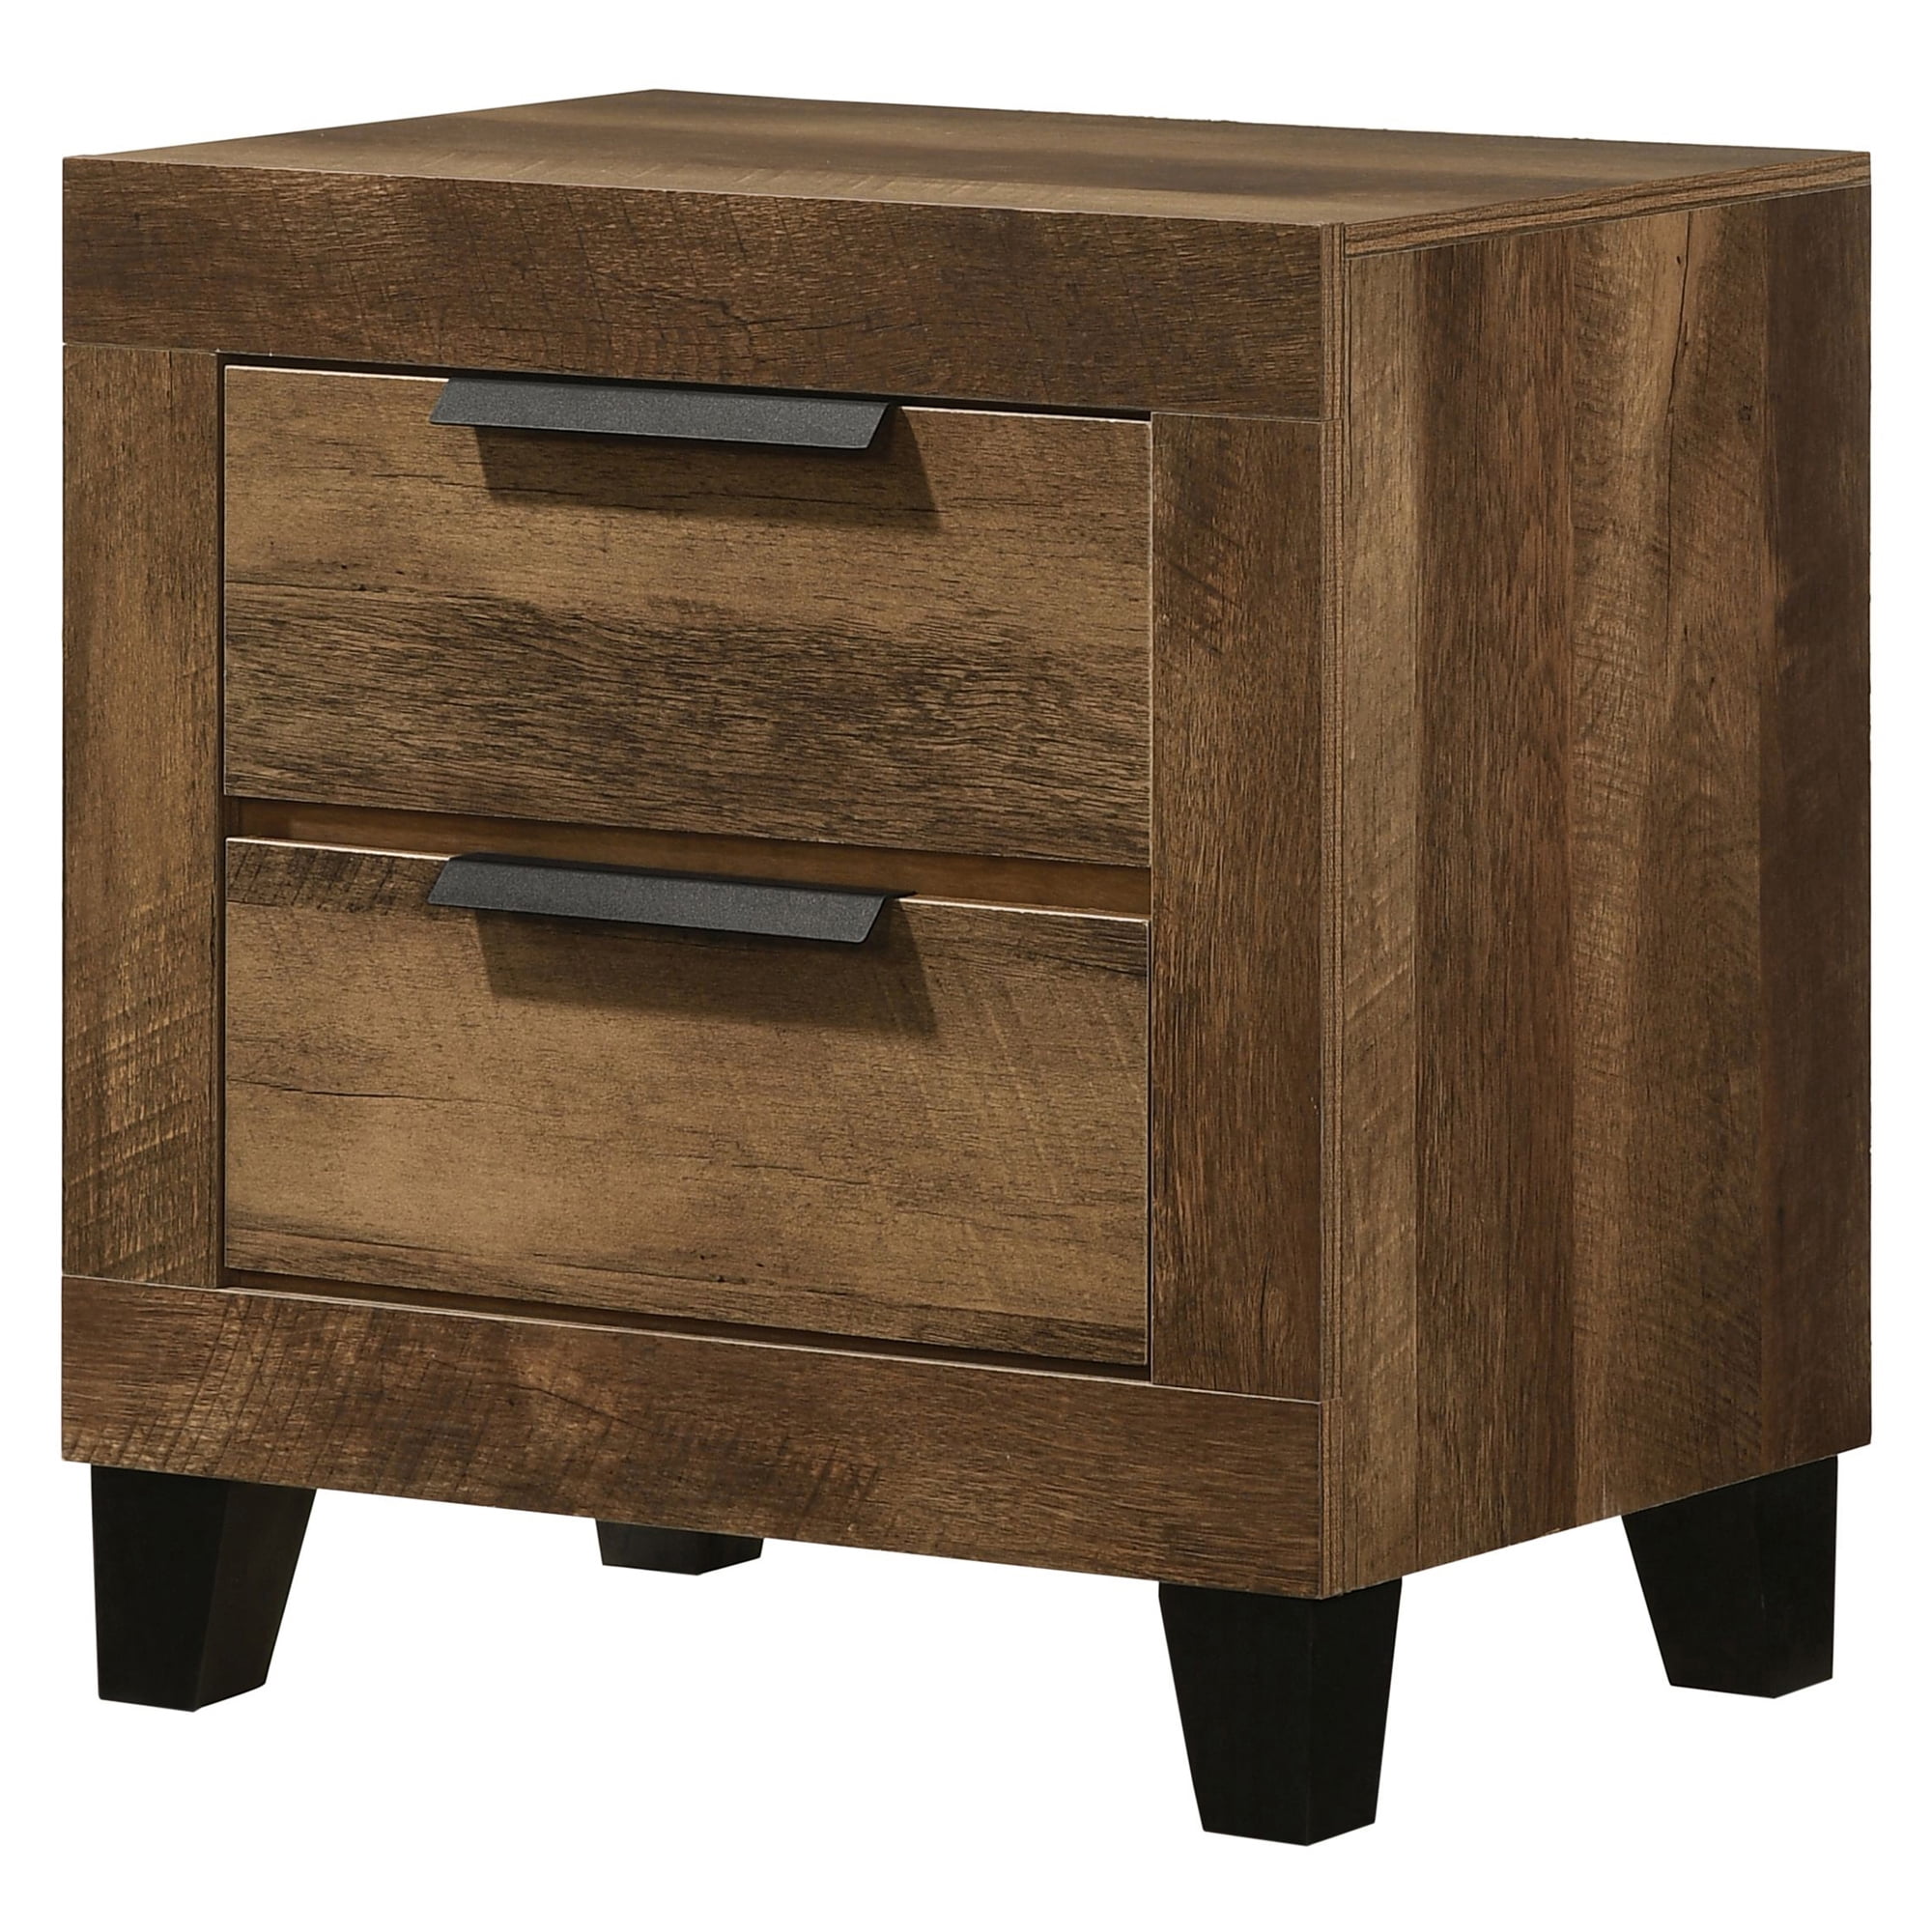 Picture of Acme Furniture 28593 22 x 15 x 23 in. Morales Nightstand, Rustic Oak